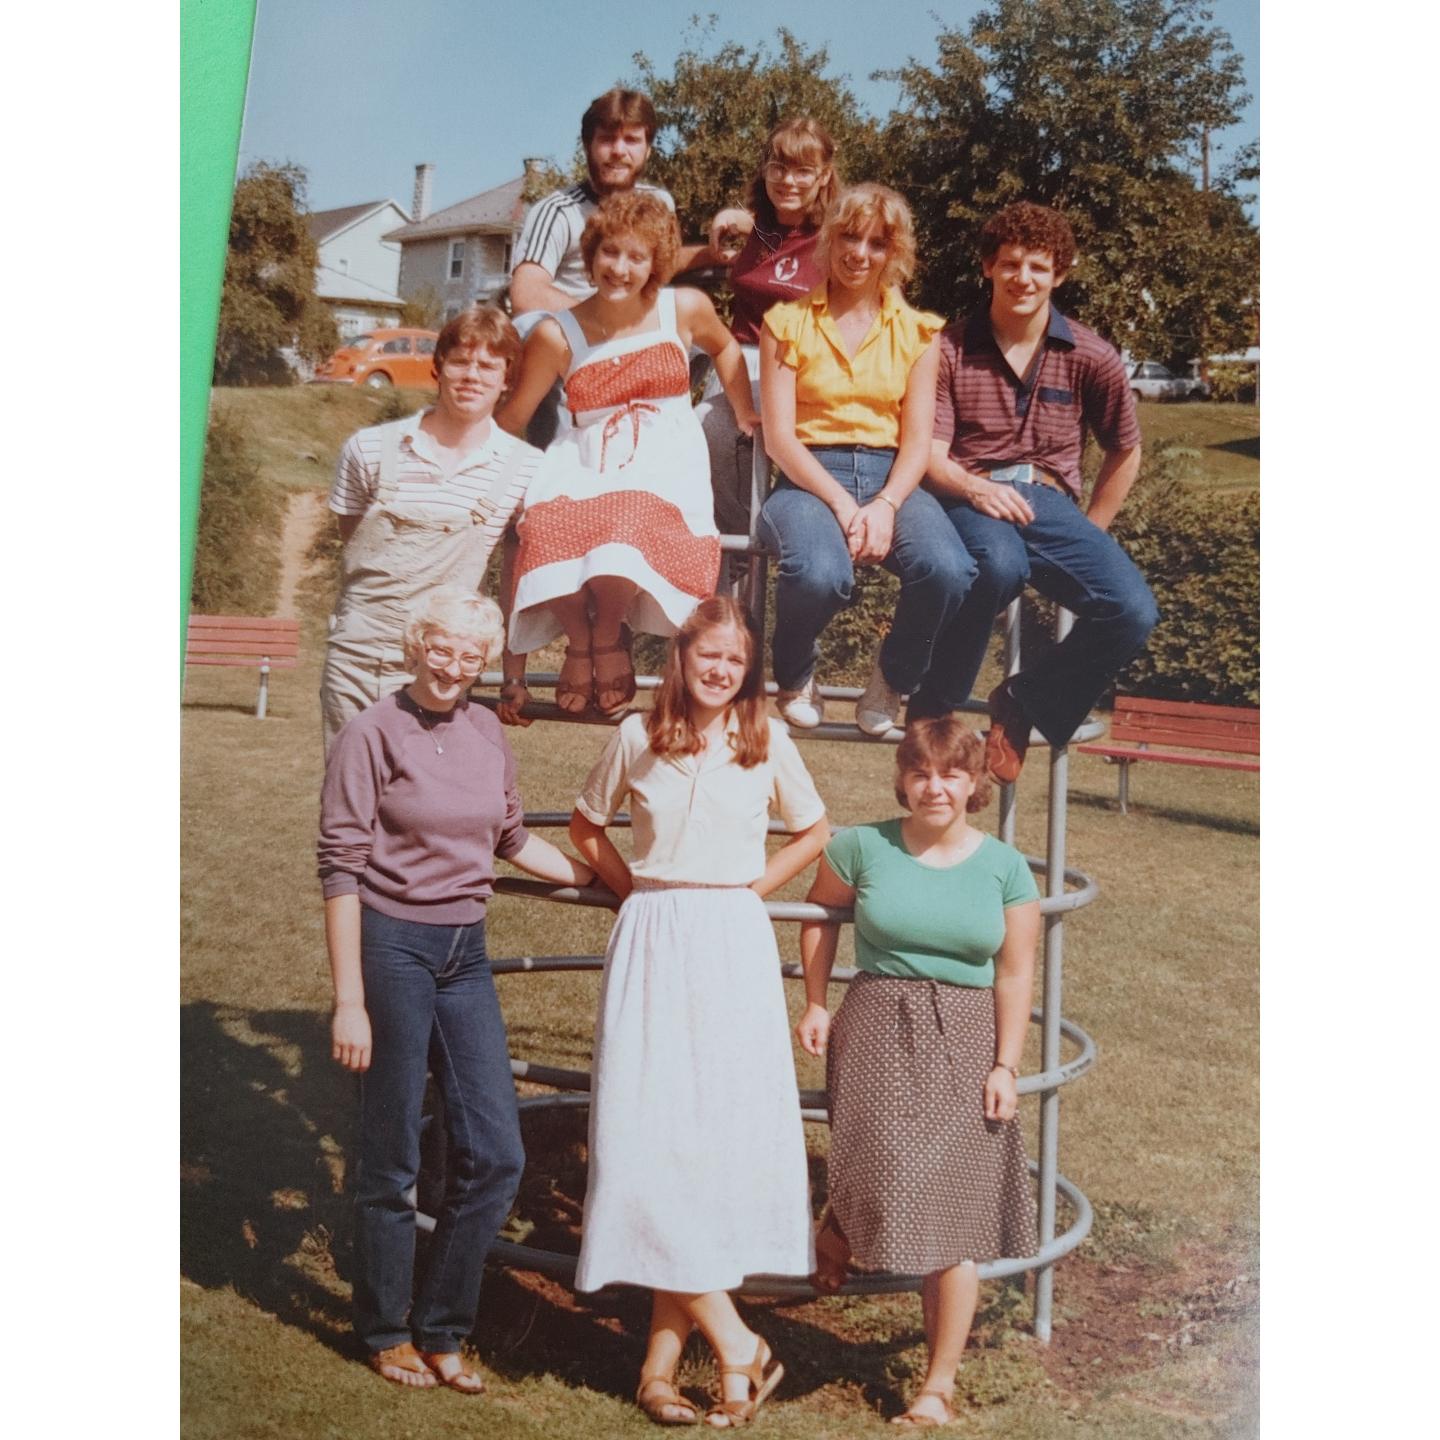 A group of 9 people pose for the camera on a jungle gym. This photo is from the 1980s